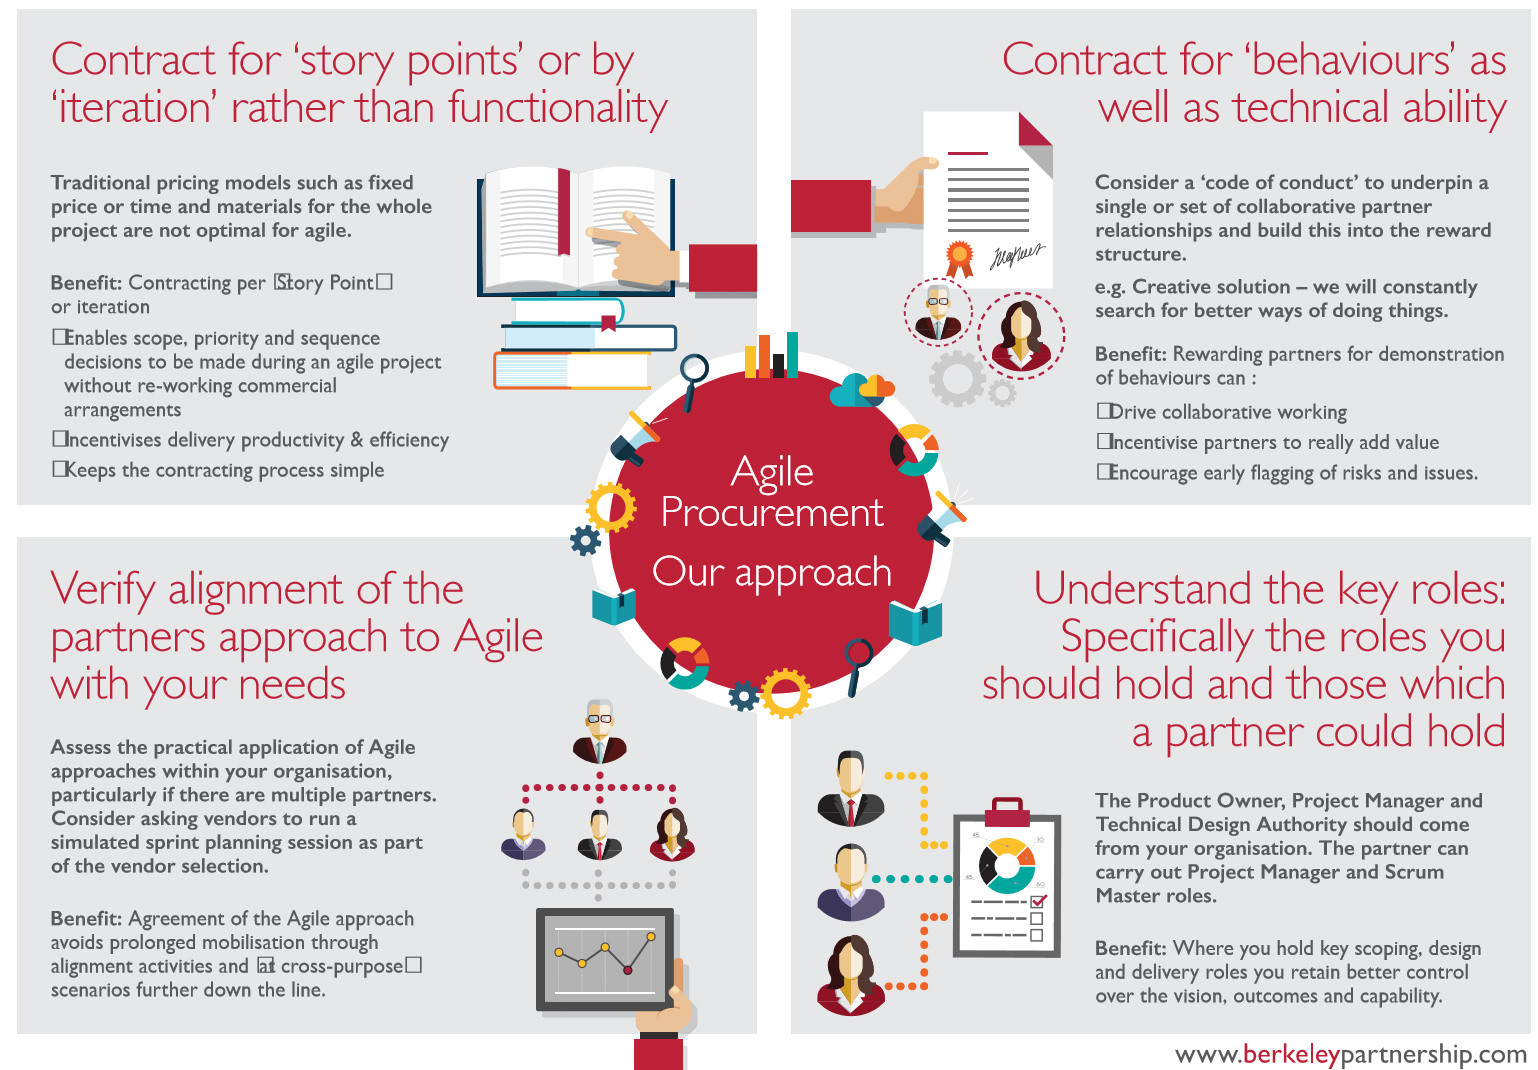 The Berkeley Partnership's graphic outlining the 10 key lessons from implementing Software as a Service (SaaS)